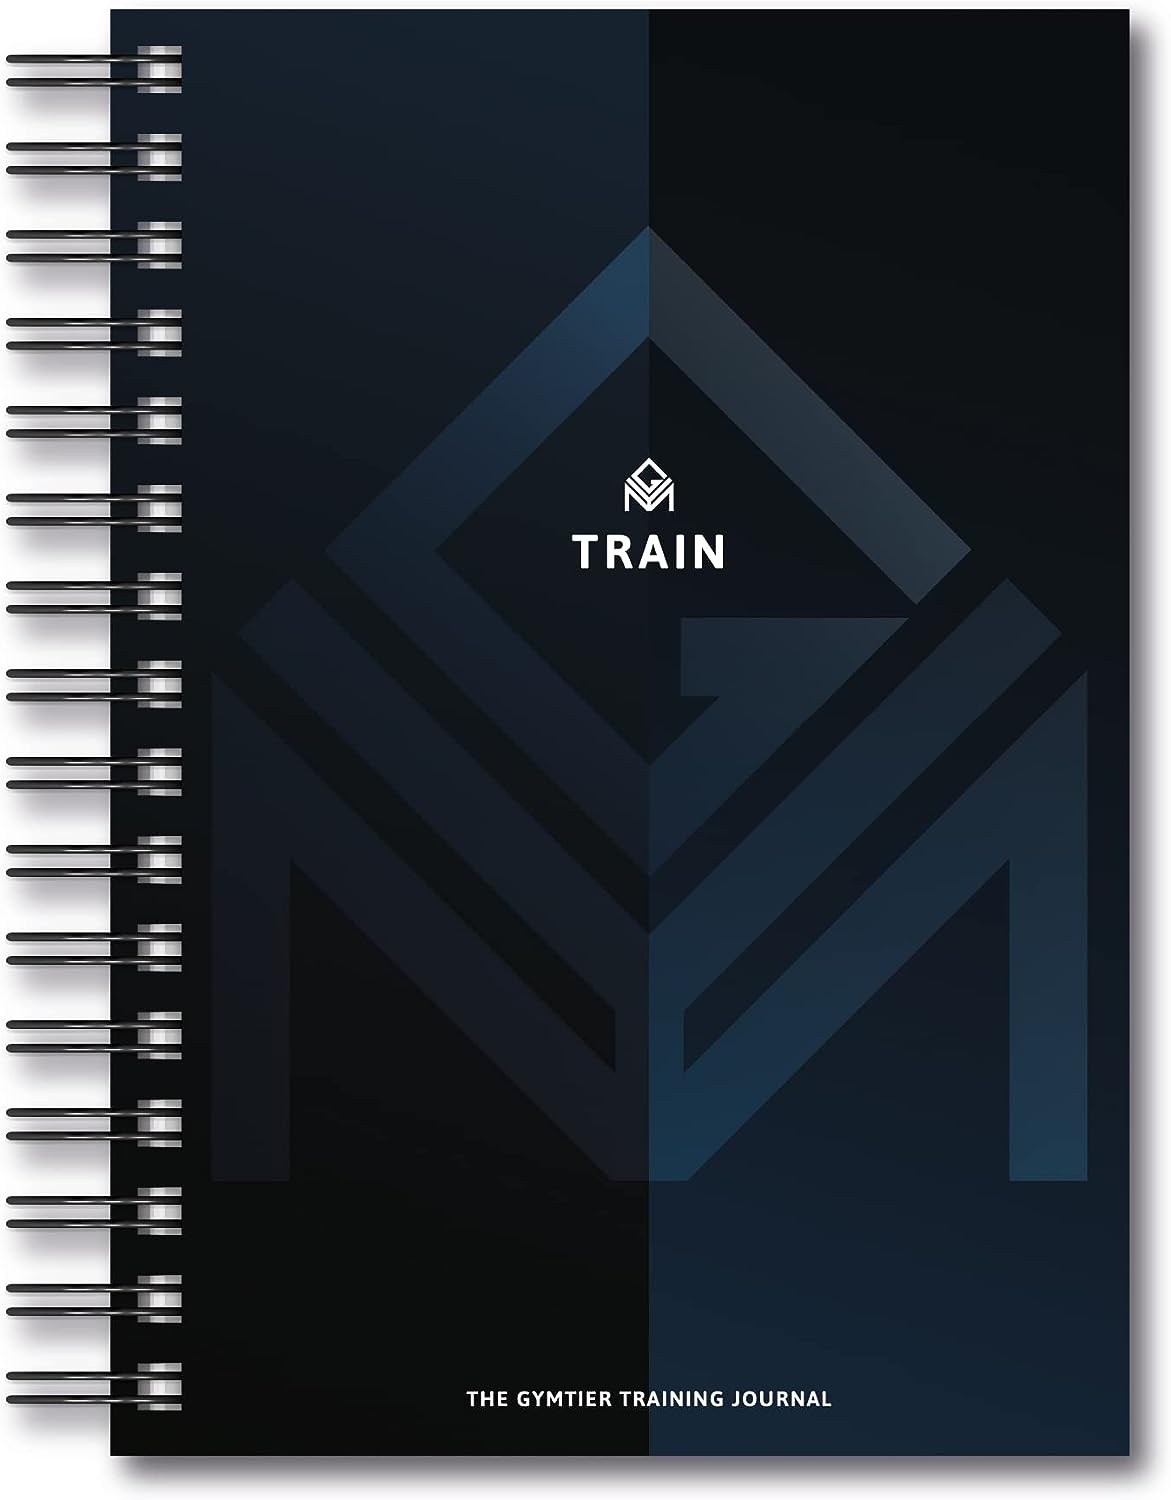 GYMTIER Workout Training Journal - A5 Gym Fitness Log Diary - 200 Pages Track your workouts - One Rep Max Tracker - Body Weight Goals  Tracking